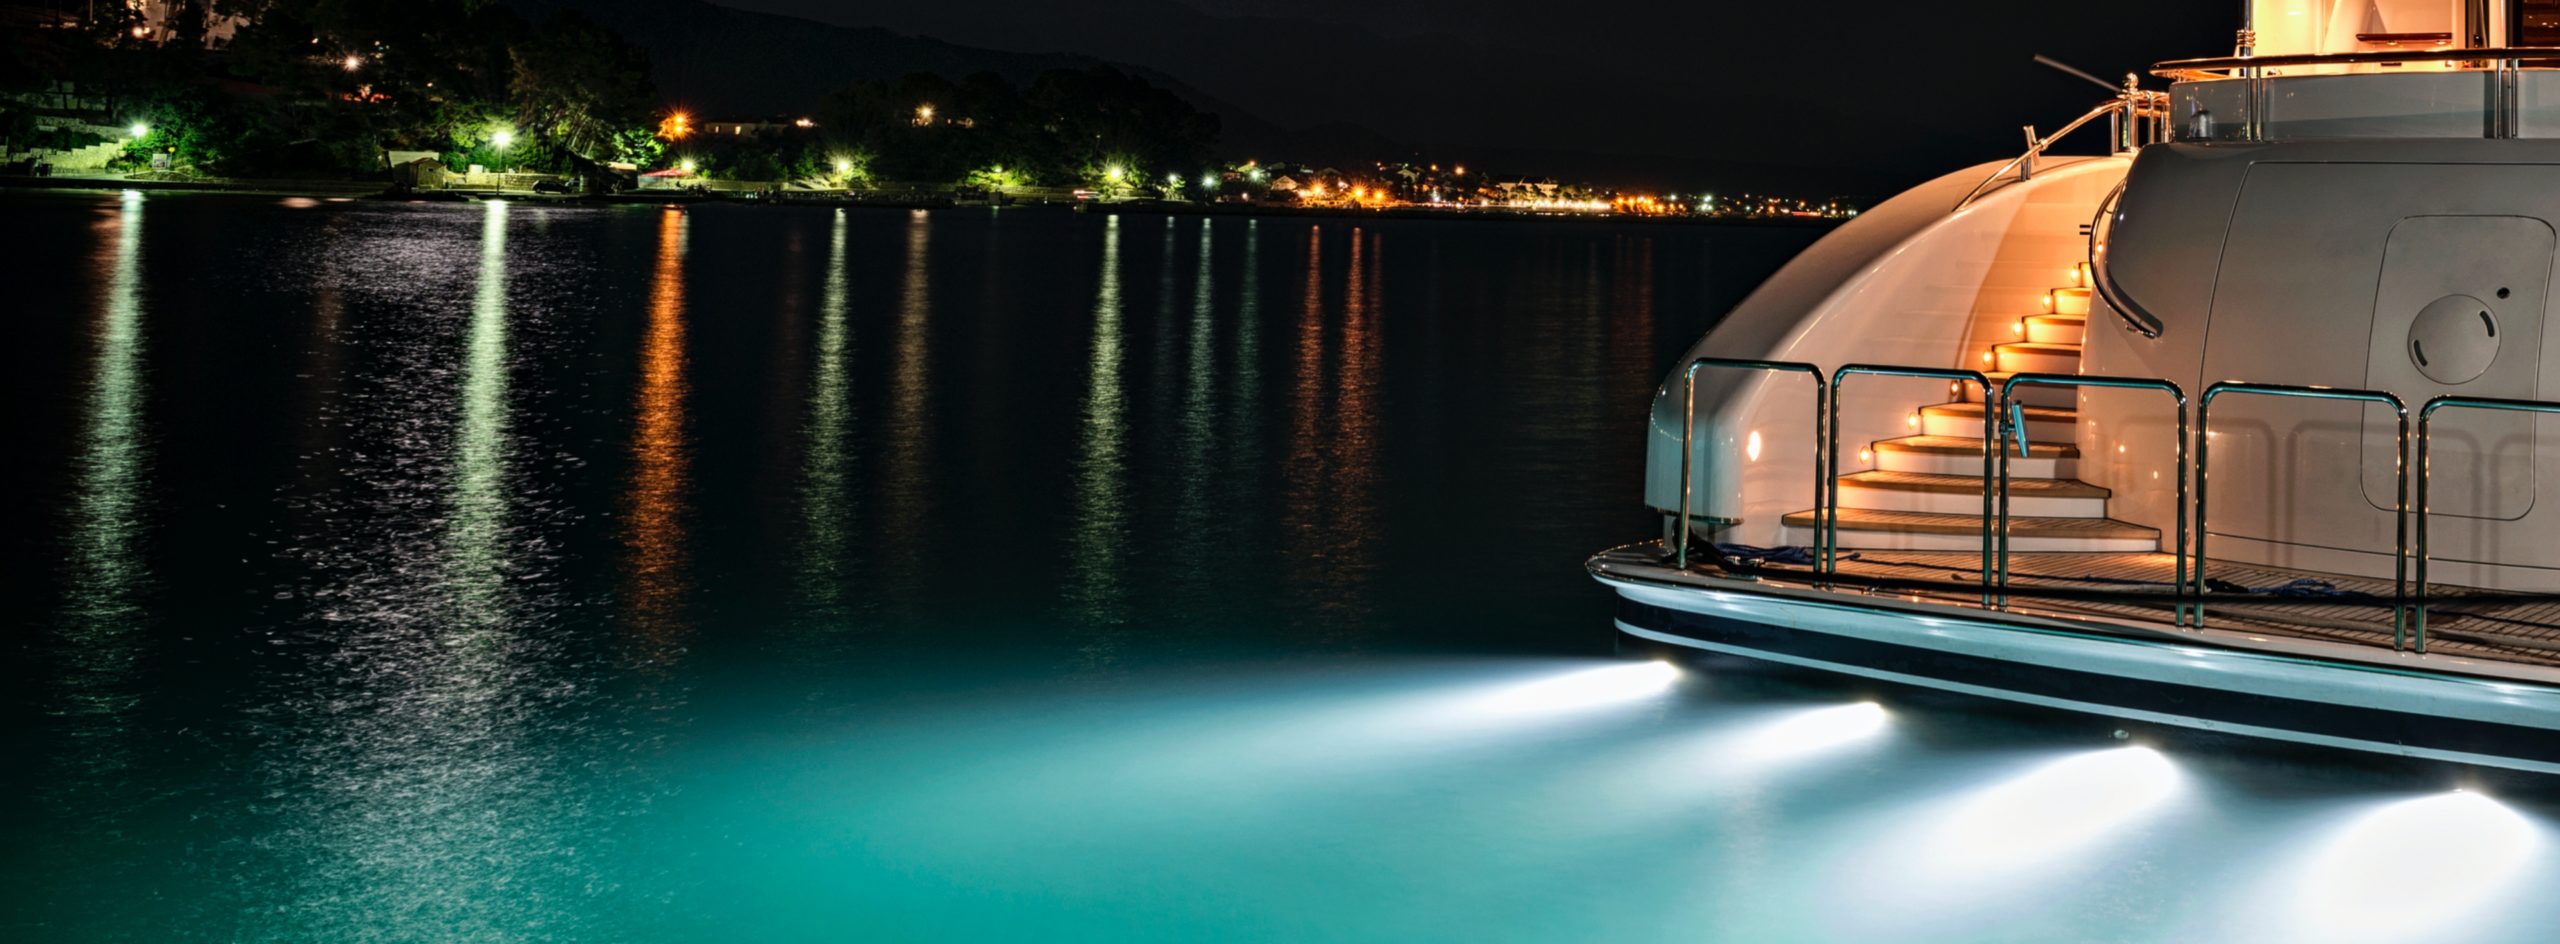 boat lights at night in the water